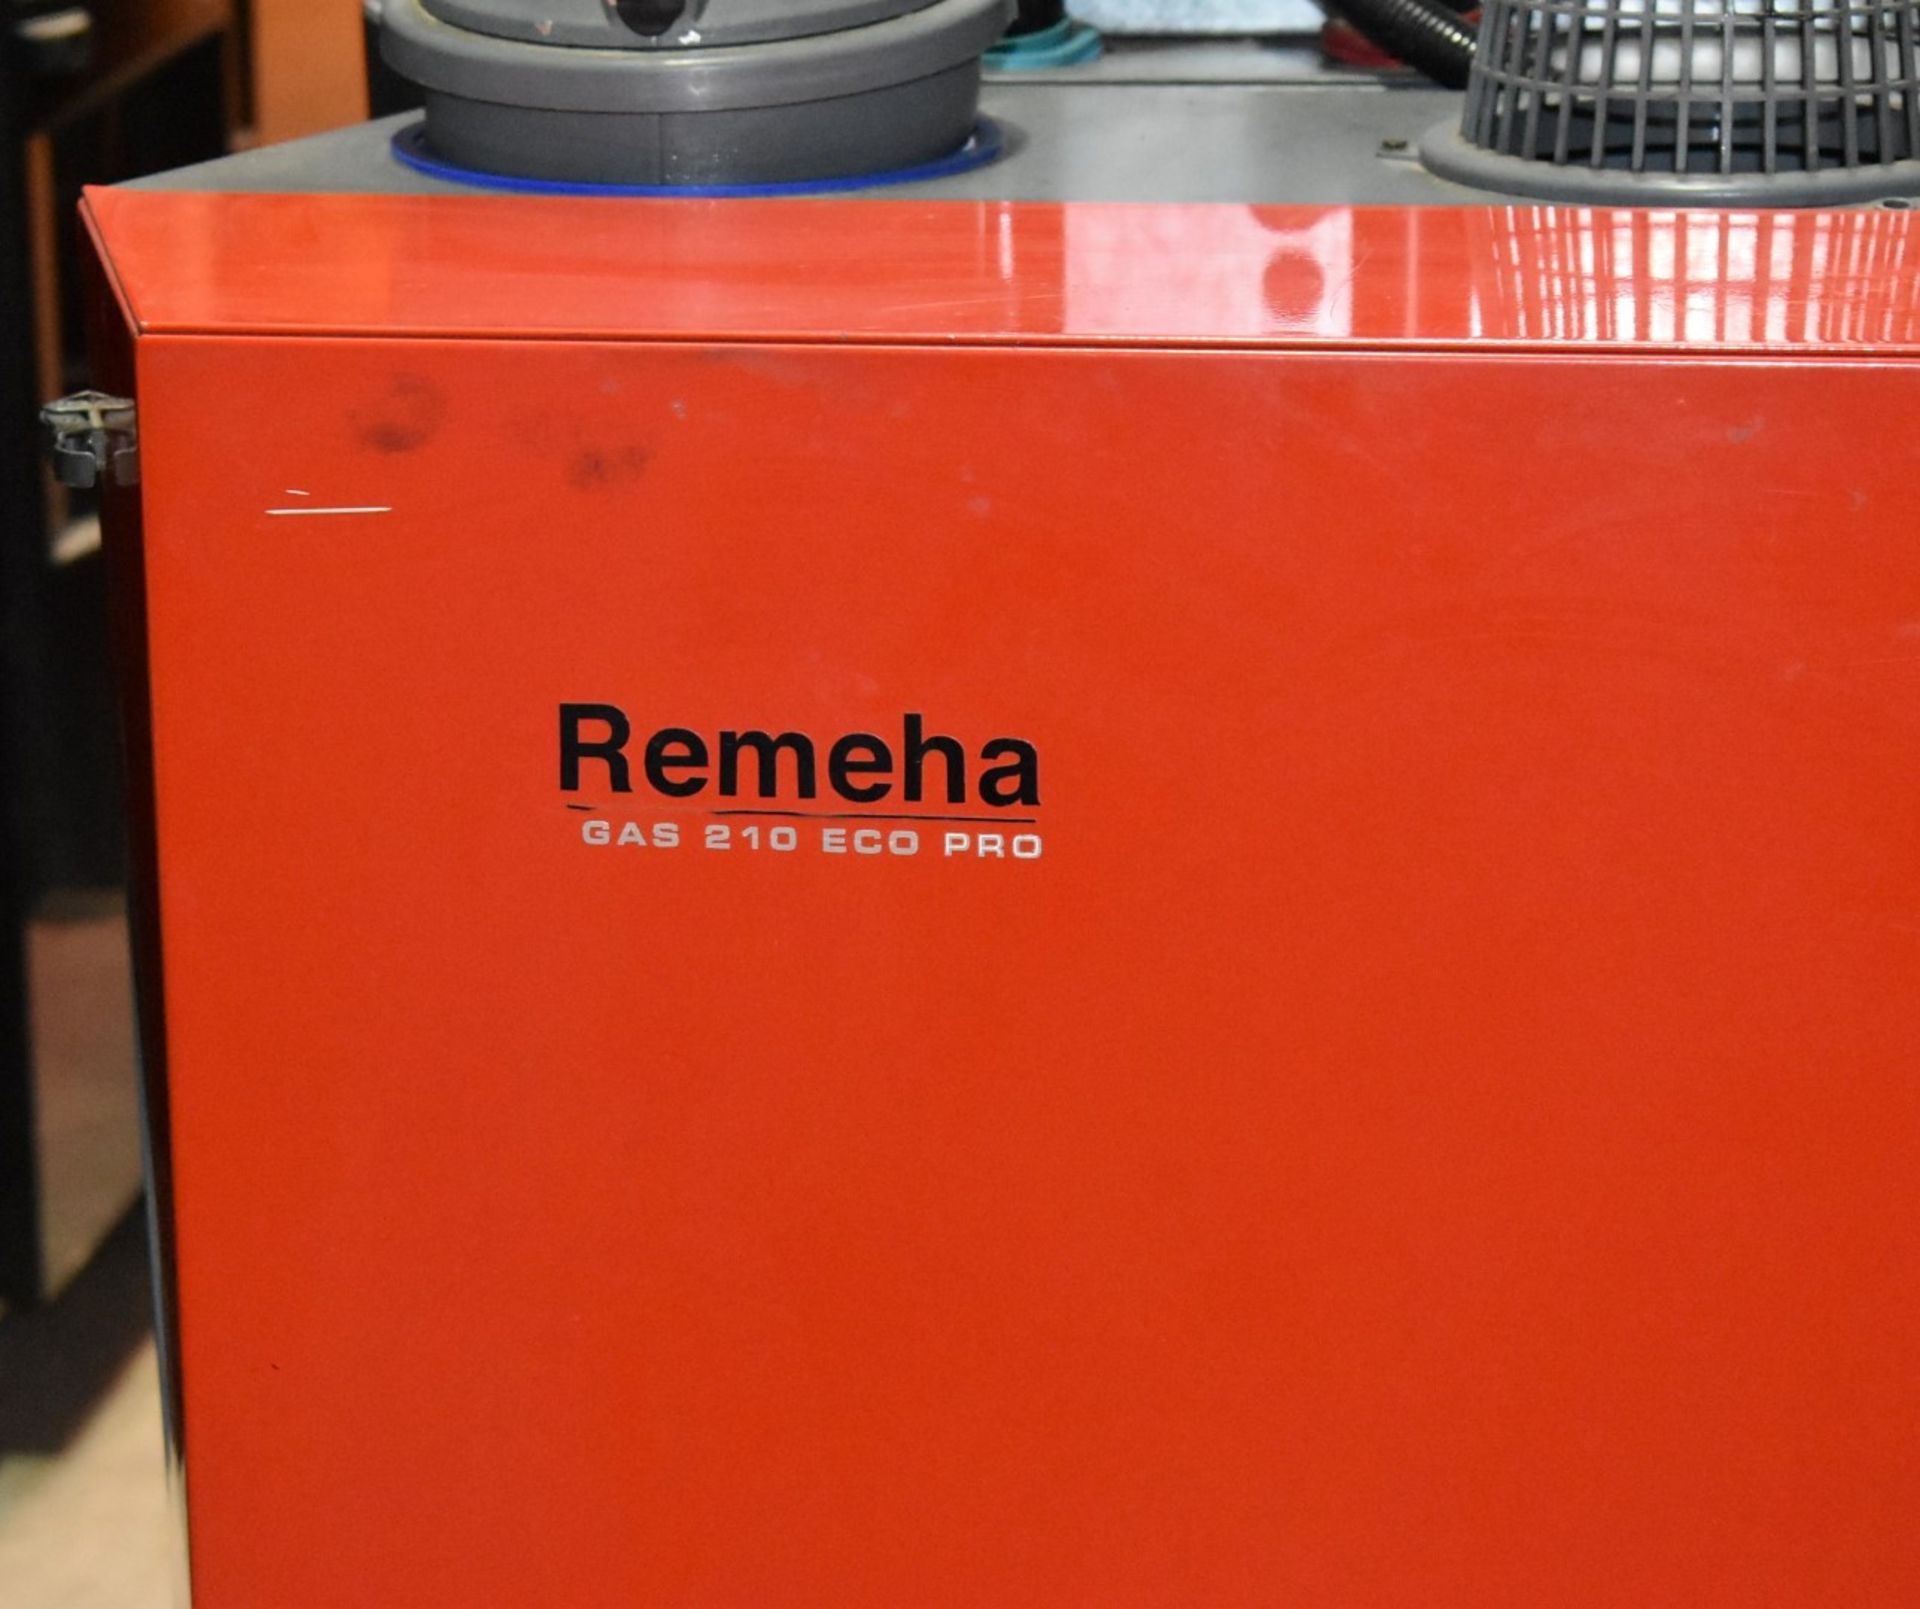 1 x Brohag Remeha Gas 210 Eco Pro Floor Standing Commercial Boiler - Ref: WH2-140 H7B - CL711 - - Image 6 of 10